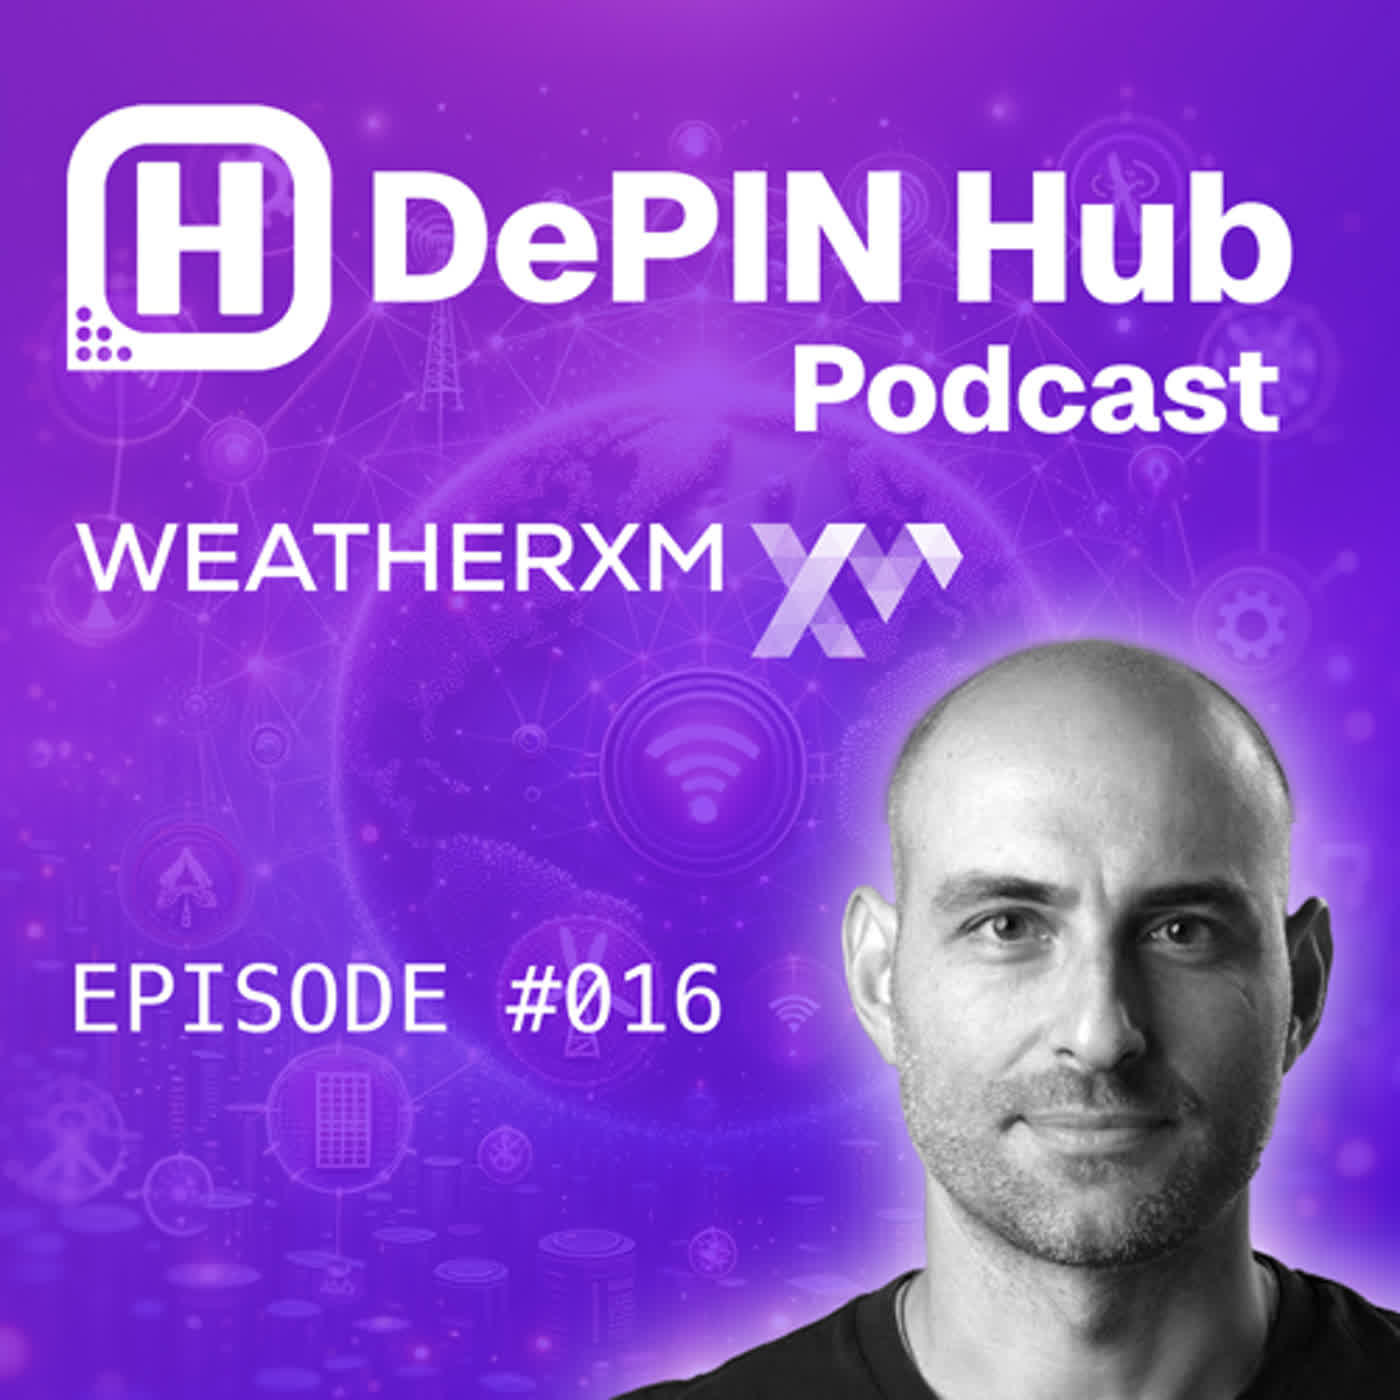 #016 - WeatherXM - Building the biggest weather station network the world has ever seen